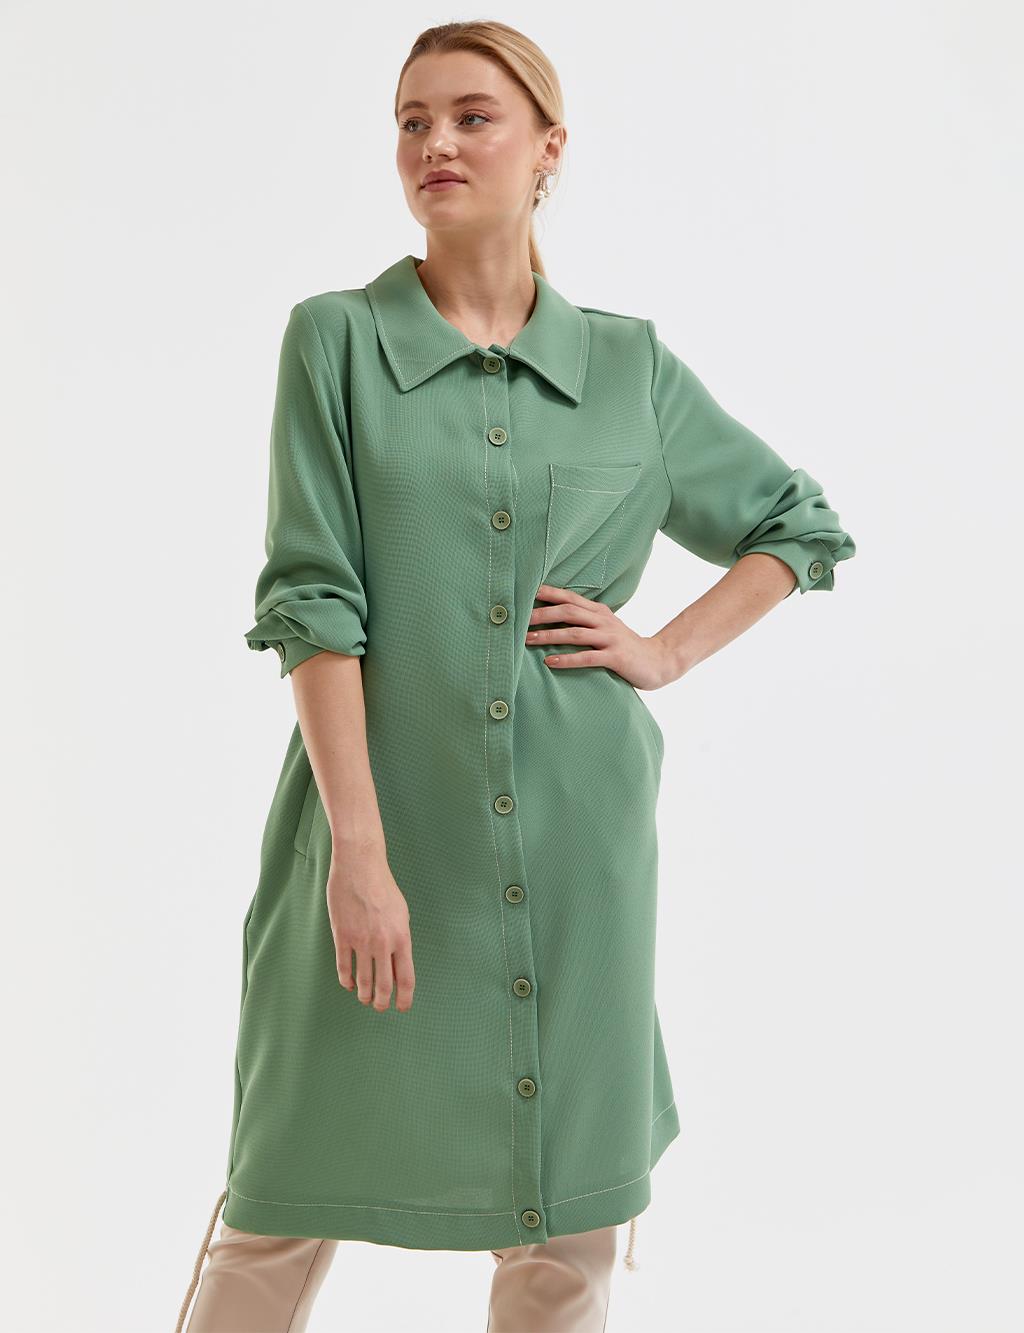 Contrast Stitched Wear & Go Green